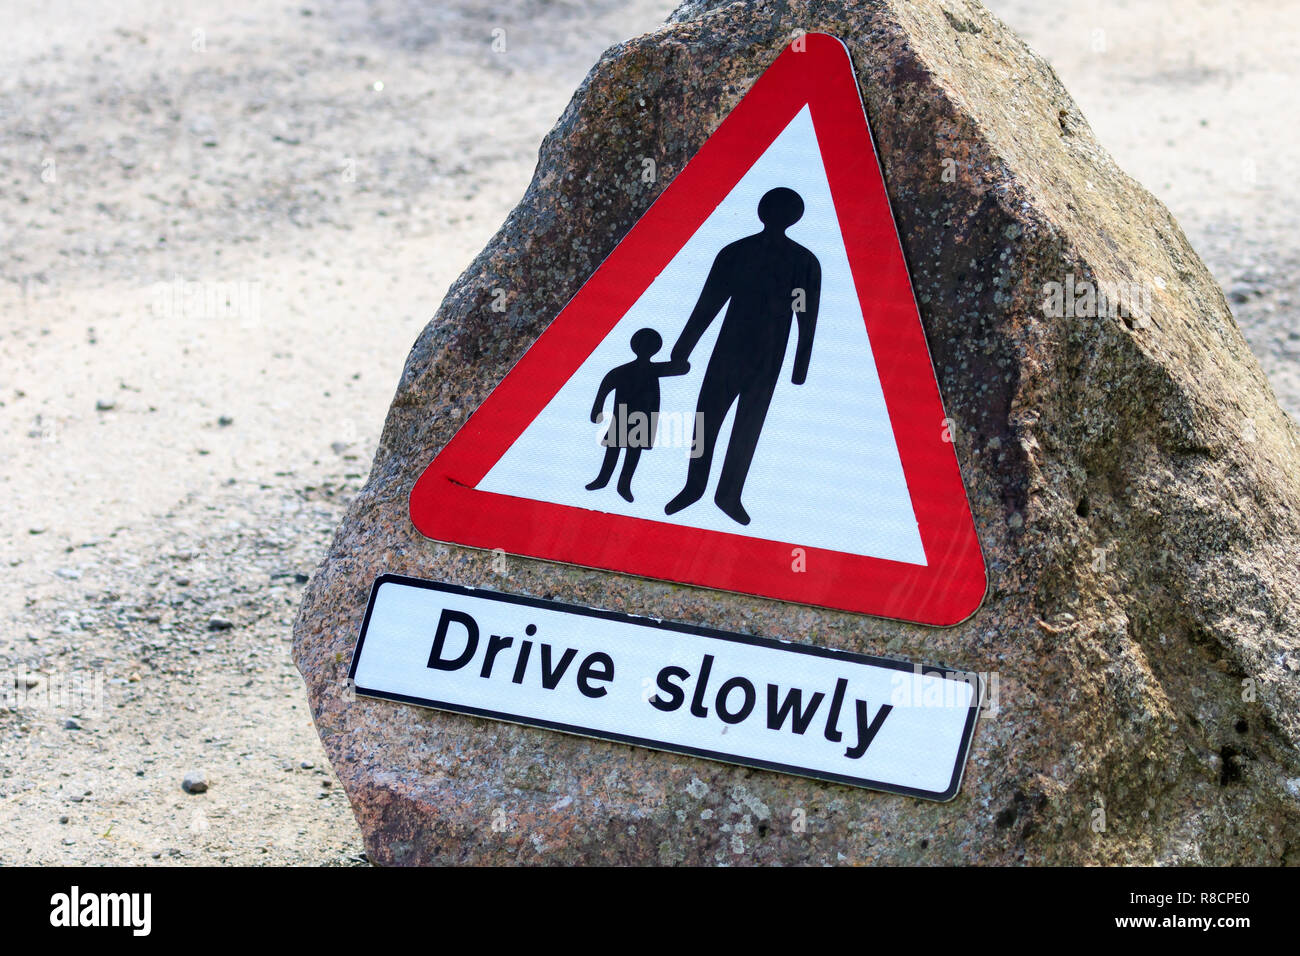 Pedestrians in road sign Drive slowly Stock Photo